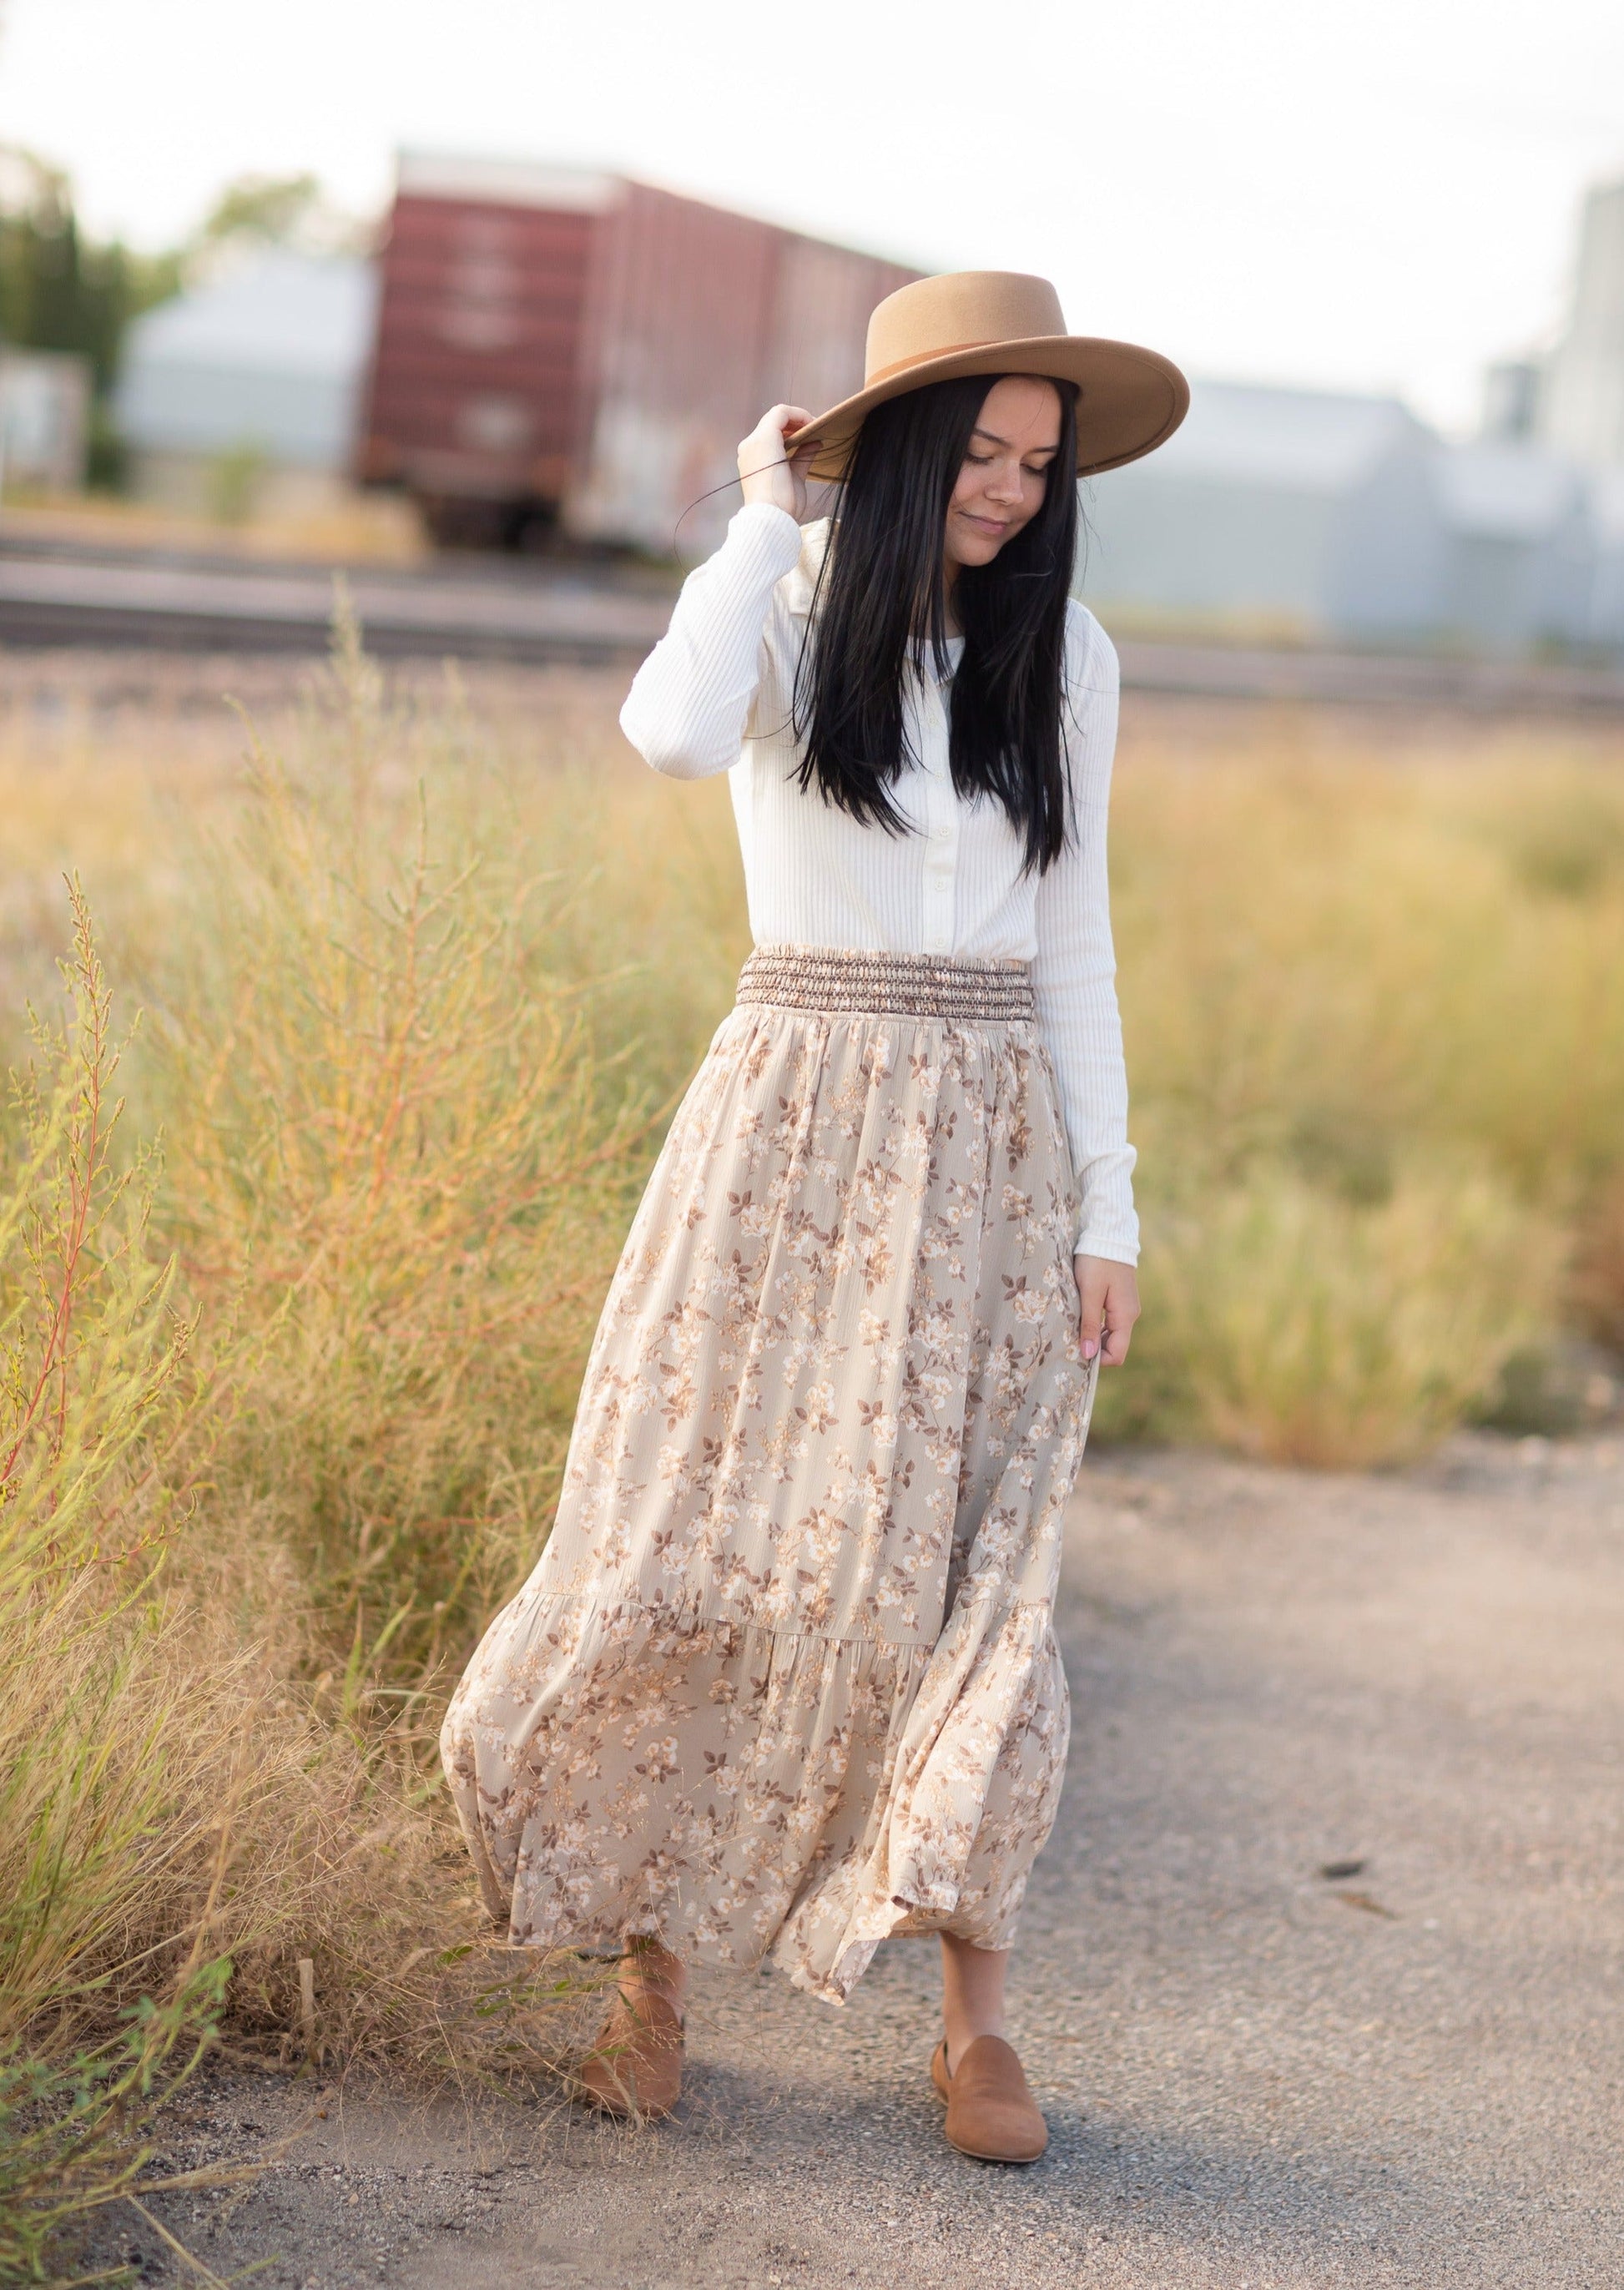 Floral Stretched Waist Midi Skirt Skirts